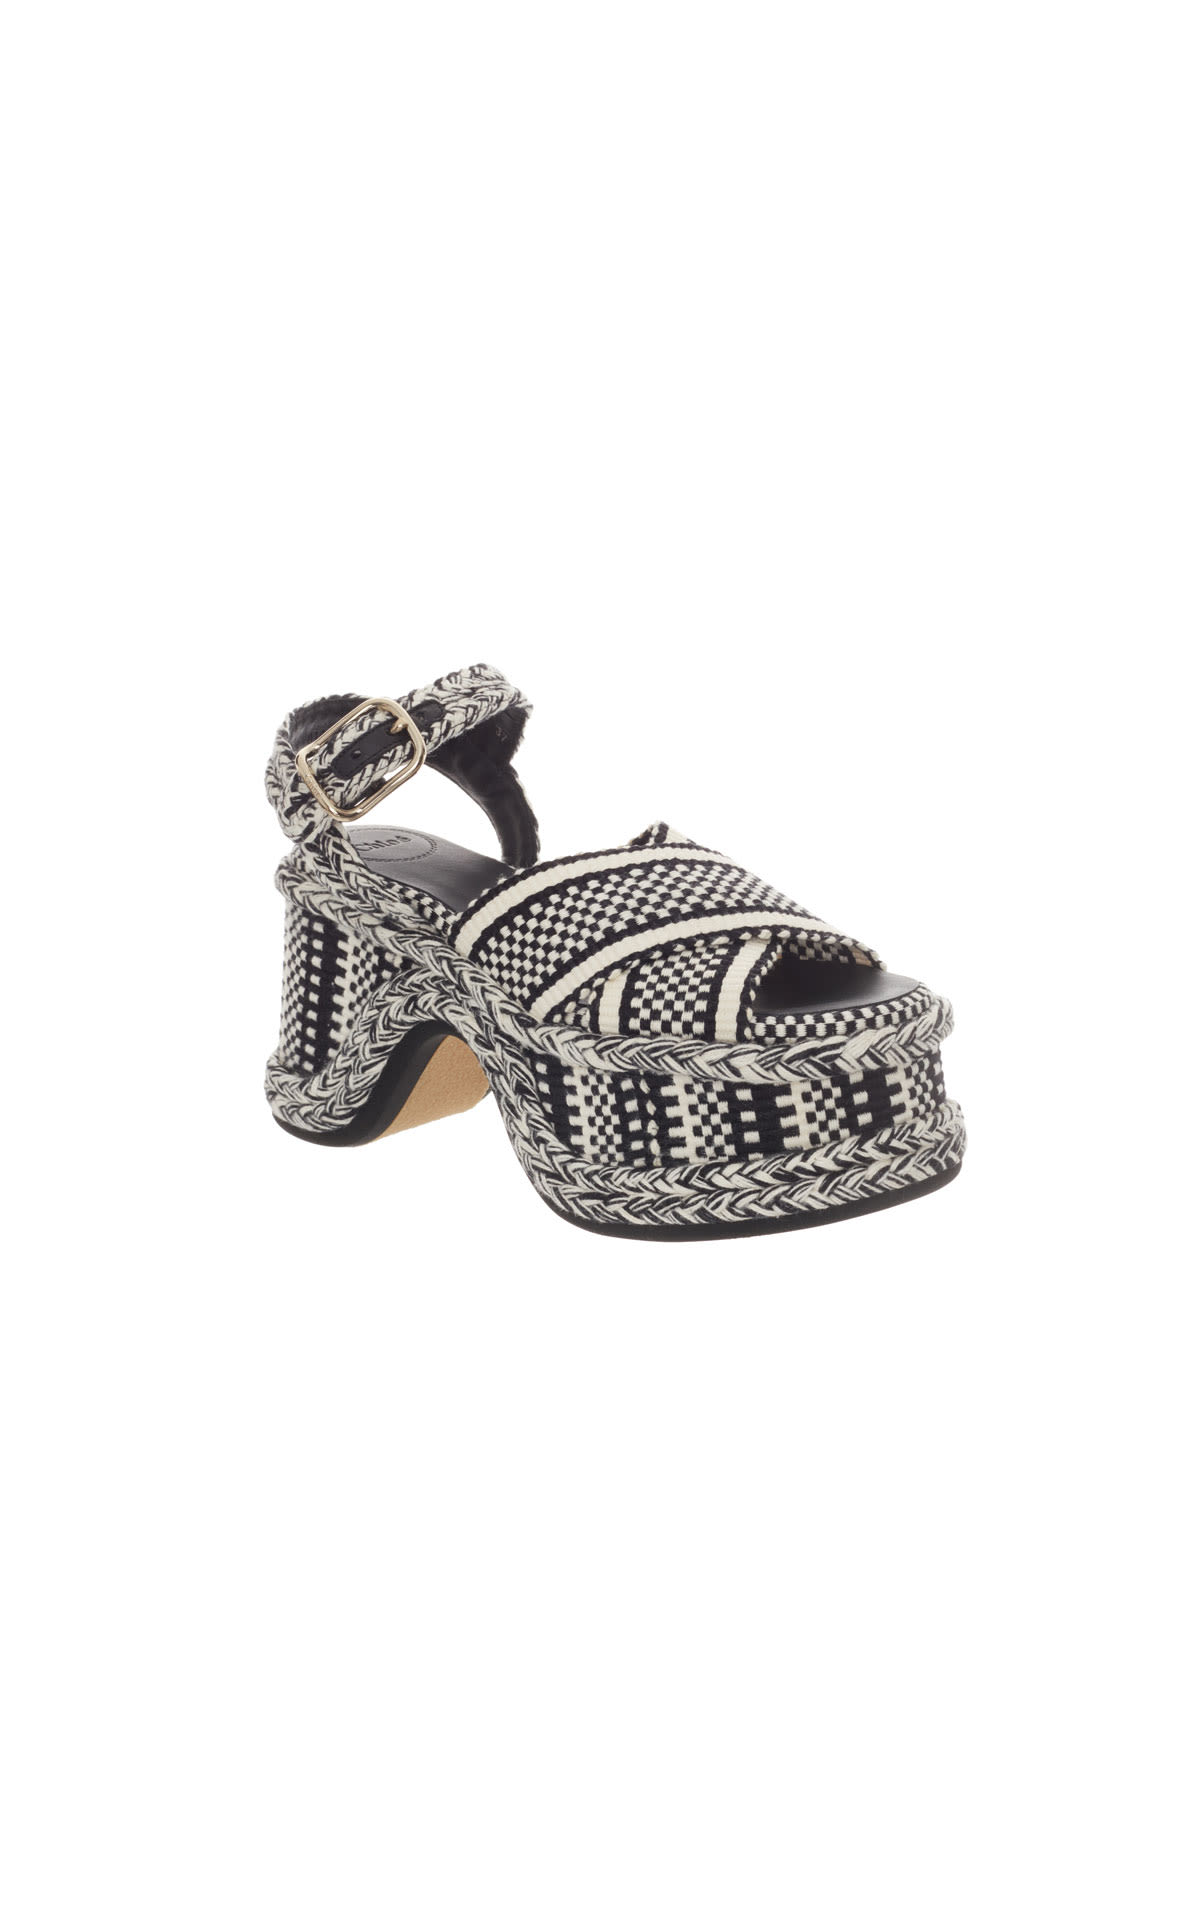 Chloe Weave sandals from Bicester Village